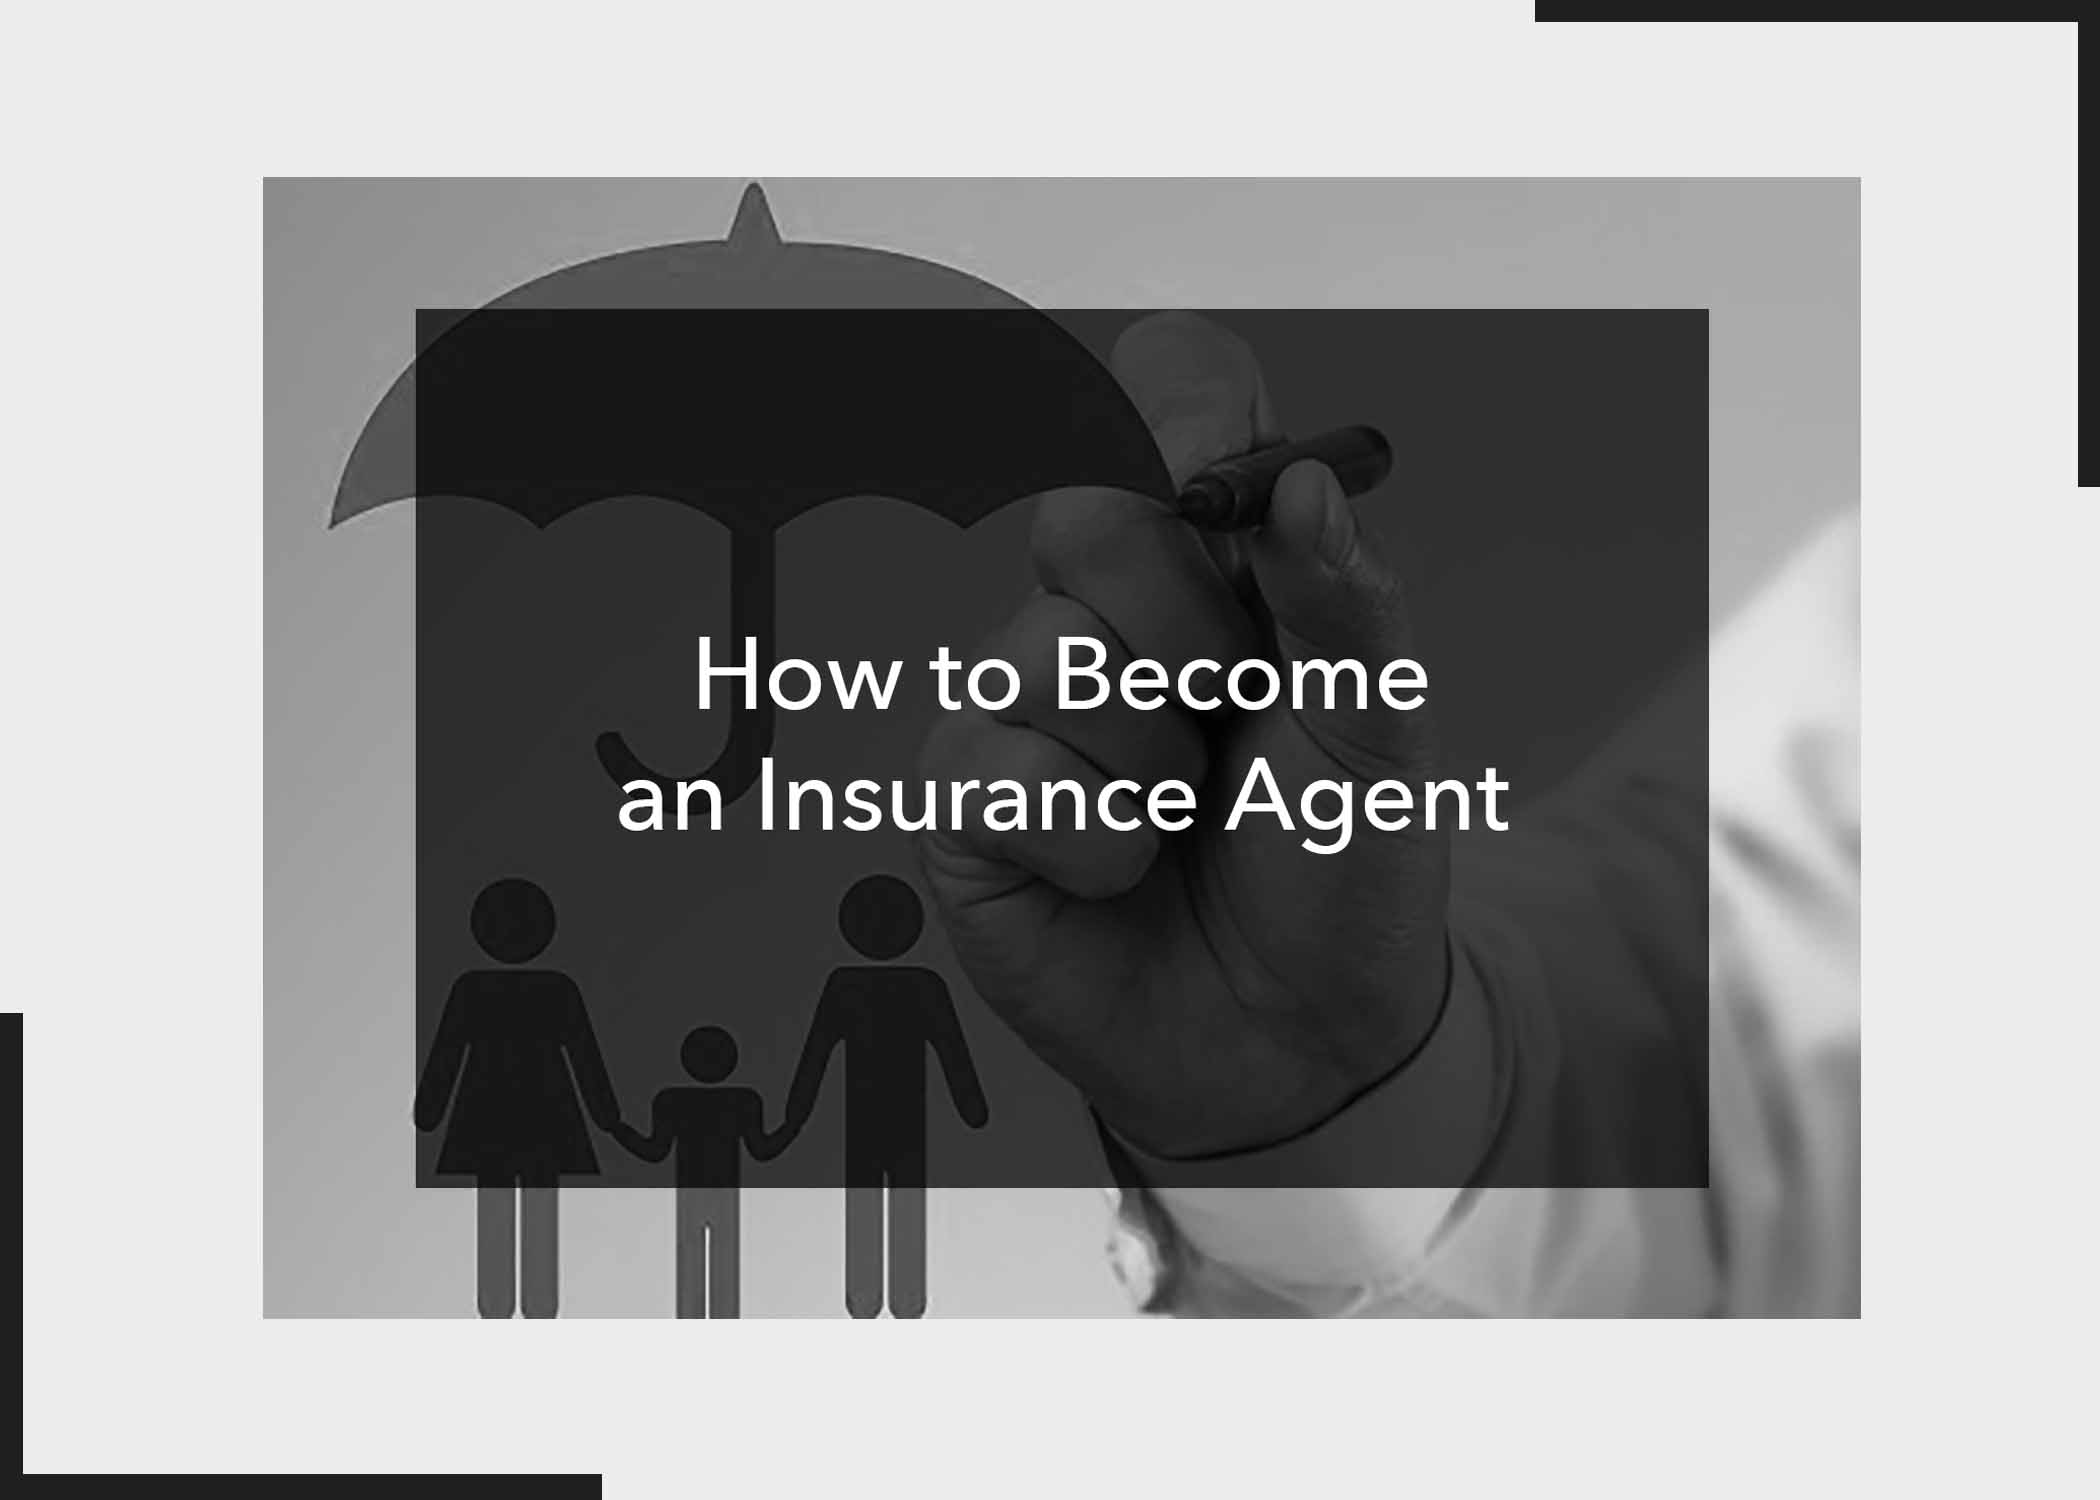 How to Become an Insurance Agent